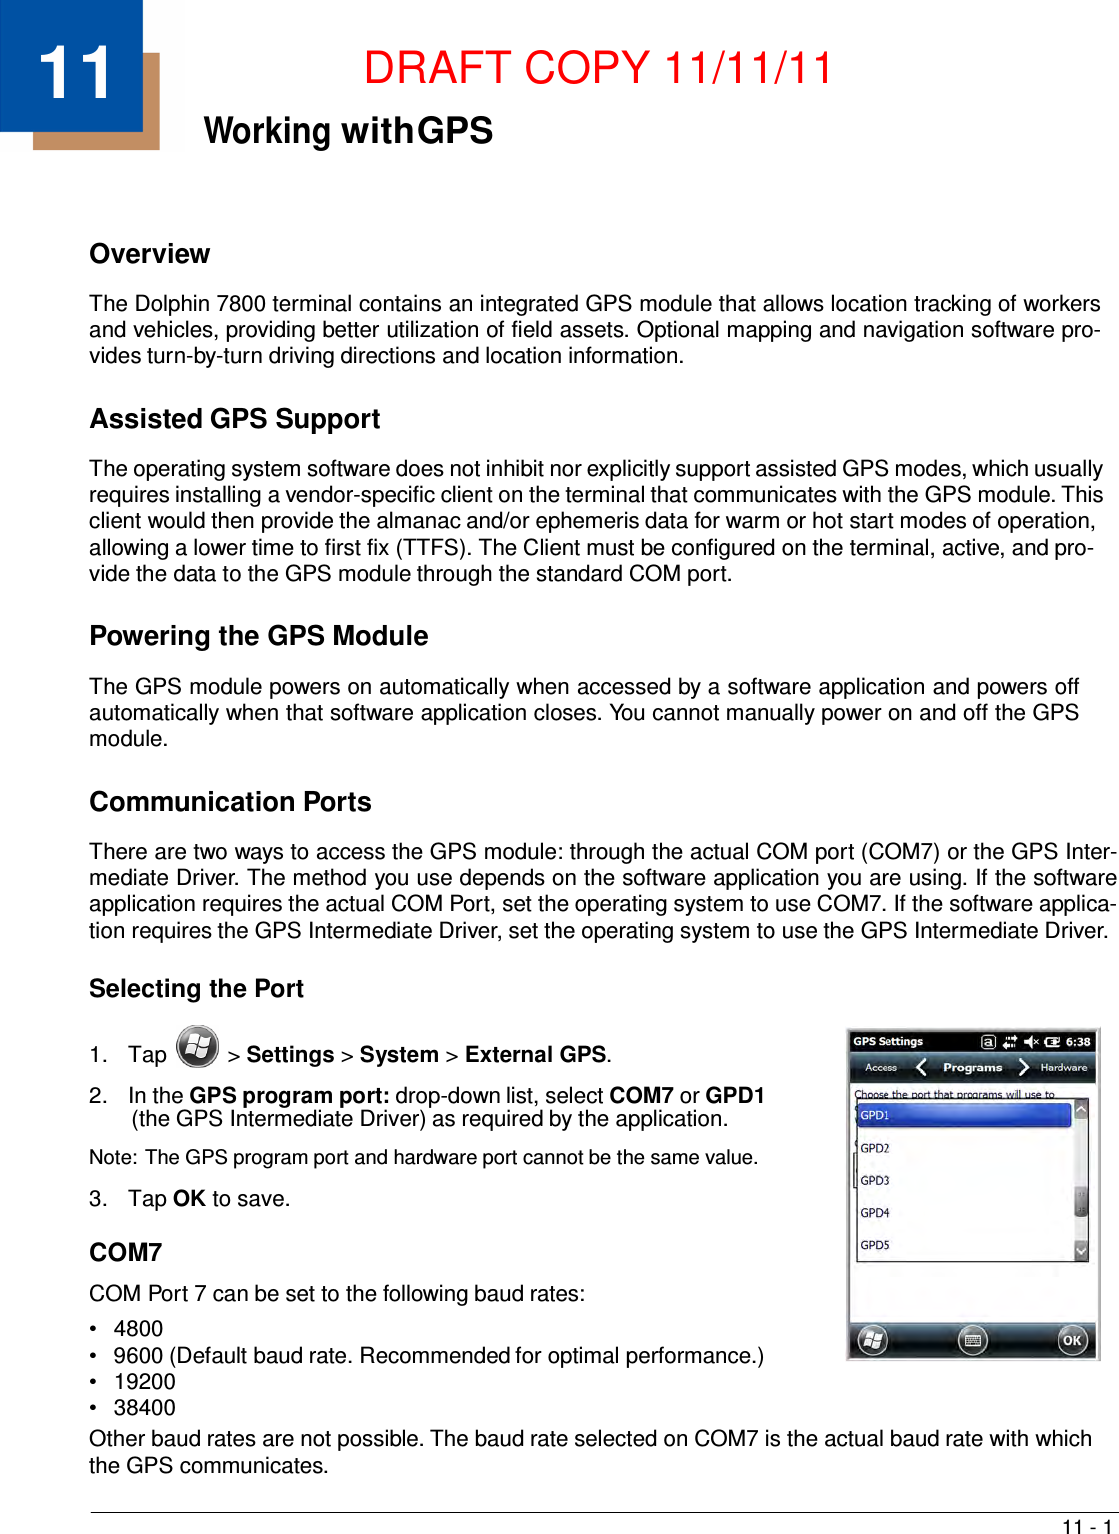 11 - 1    11  DRAFT COPY 11/11/11 Working with GPS     Overview  The Dolphin 7800 terminal contains an integrated GPS module that allows location tracking of workers and vehicles, providing better utilization of field assets. Optional mapping and navigation software pro- vides turn-by-turn driving directions and location information.   Assisted GPS Support  The operating system software does not inhibit nor explicitly support assisted GPS modes, which usually requires installing a vendor-specific client on the terminal that communicates with the GPS module. This client would then provide the almanac and/or ephemeris data for warm or hot start modes of operation, allowing a lower time to first fix (TTFS). The Client must be configured on the terminal, active, and pro- vide the data to the GPS module through the standard COM port.   Powering the GPS Module  The GPS module powers on automatically when accessed by a software application and powers off automatically when that software application closes. You cannot manually power on and off the GPS module.   Communication Ports  There are two ways to access the GPS module: through the actual COM port (COM7) or the GPS Inter- mediate Driver. The method you use depends on the software application you are using. If the software application requires the actual COM Port, set the operating system to use COM7. If the software applica- tion requires the GPS Intermediate Driver, set the operating system to use the GPS Intermediate Driver.  Selecting the Port   1.  Tap  &gt; Settings &gt; System &gt; External GPS.  2.  In the GPS program port: drop-down list, select COM7 or GPD1 (the GPS Intermediate Driver) as required by the application.  Note: The GPS program port and hardware port cannot be the same value.  3.  Tap OK to save.  COM7  COM Port 7 can be set to the following baud rates: •   4800 •   9600 (Default baud rate. Recommended for optimal performance.) •   19200 •   38400 Other baud rates are not possible. The baud rate selected on COM7 is the actual baud rate with which the GPS communicates. 